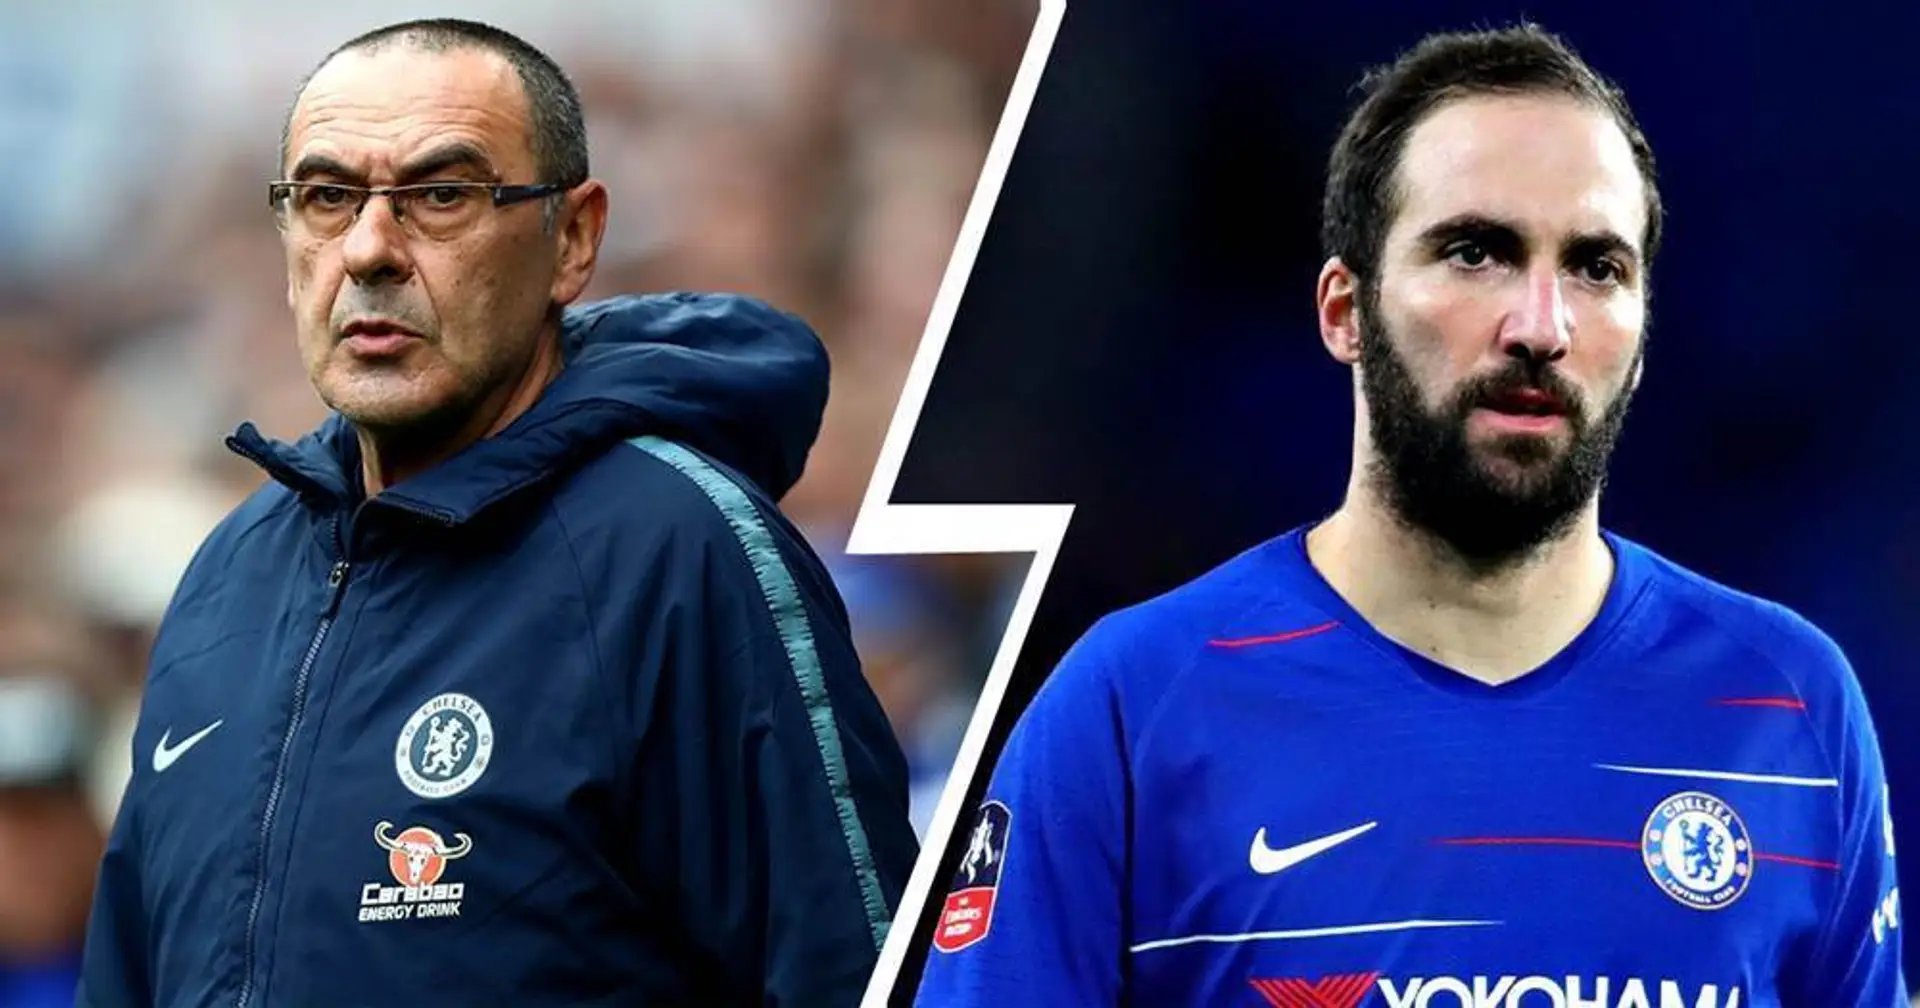 'He needs pampering one day and beating against a wall the next!': Sarri names Higuain as player who he often fights with